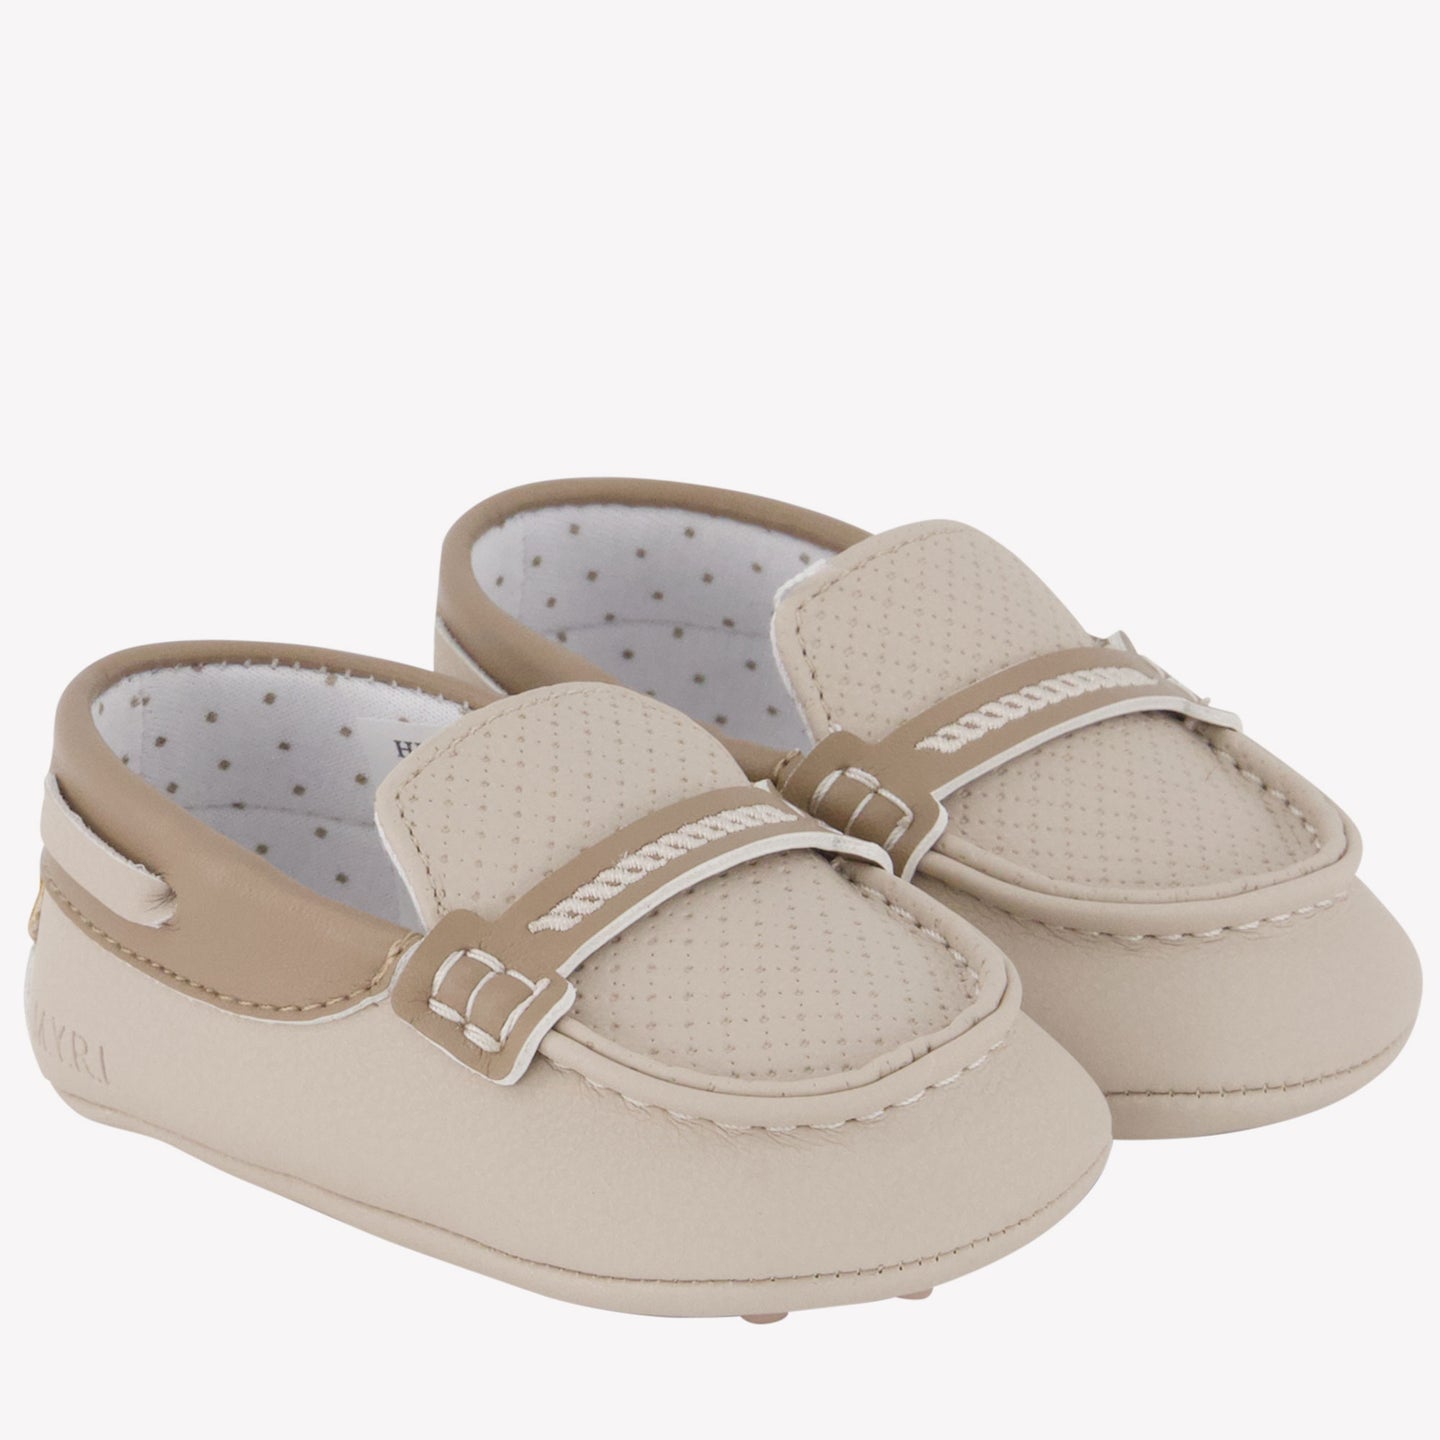 Mayoral Baby Boys Shoes Beige